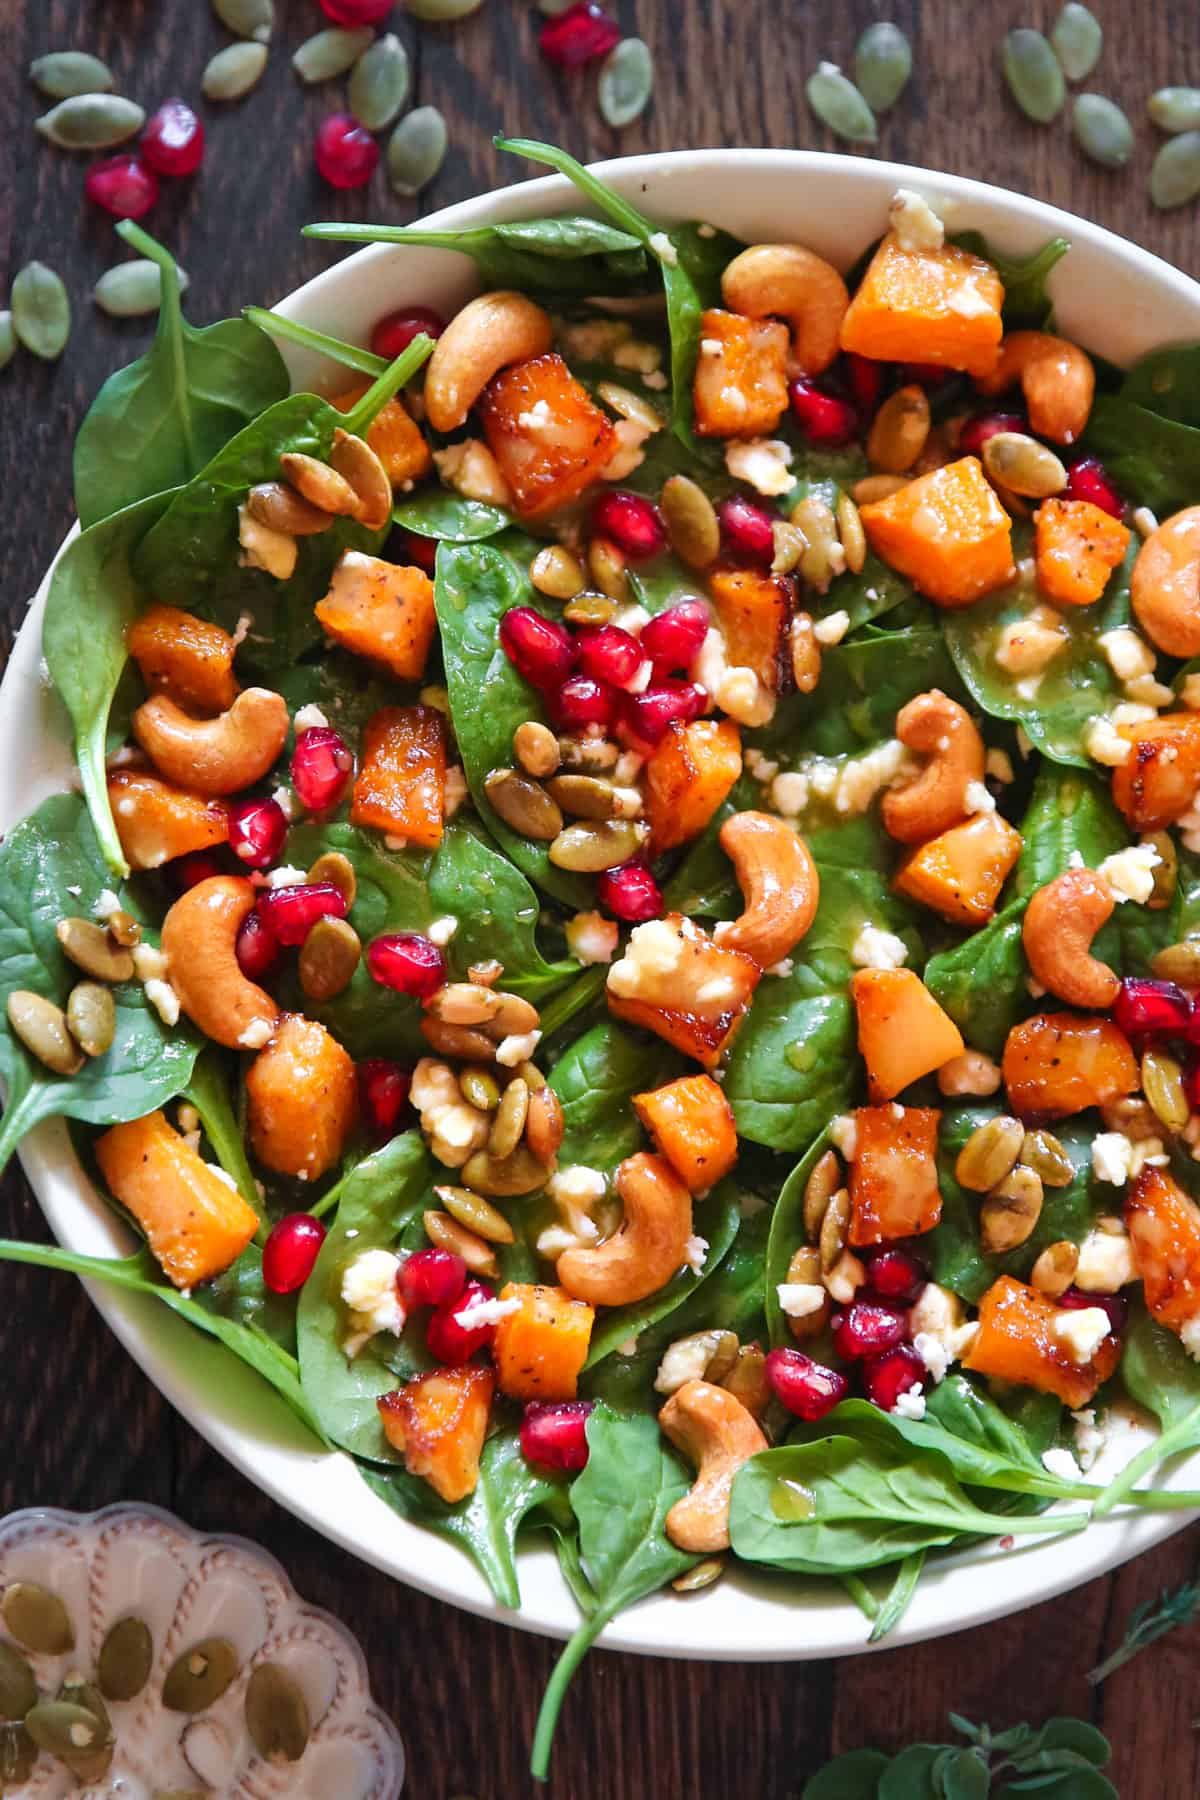 Butternut squash salad with spinach, cashews, pumpkin seeds, feta cheese, pomegranate seeds, and mustard honey-lime dressing in a white bowl.